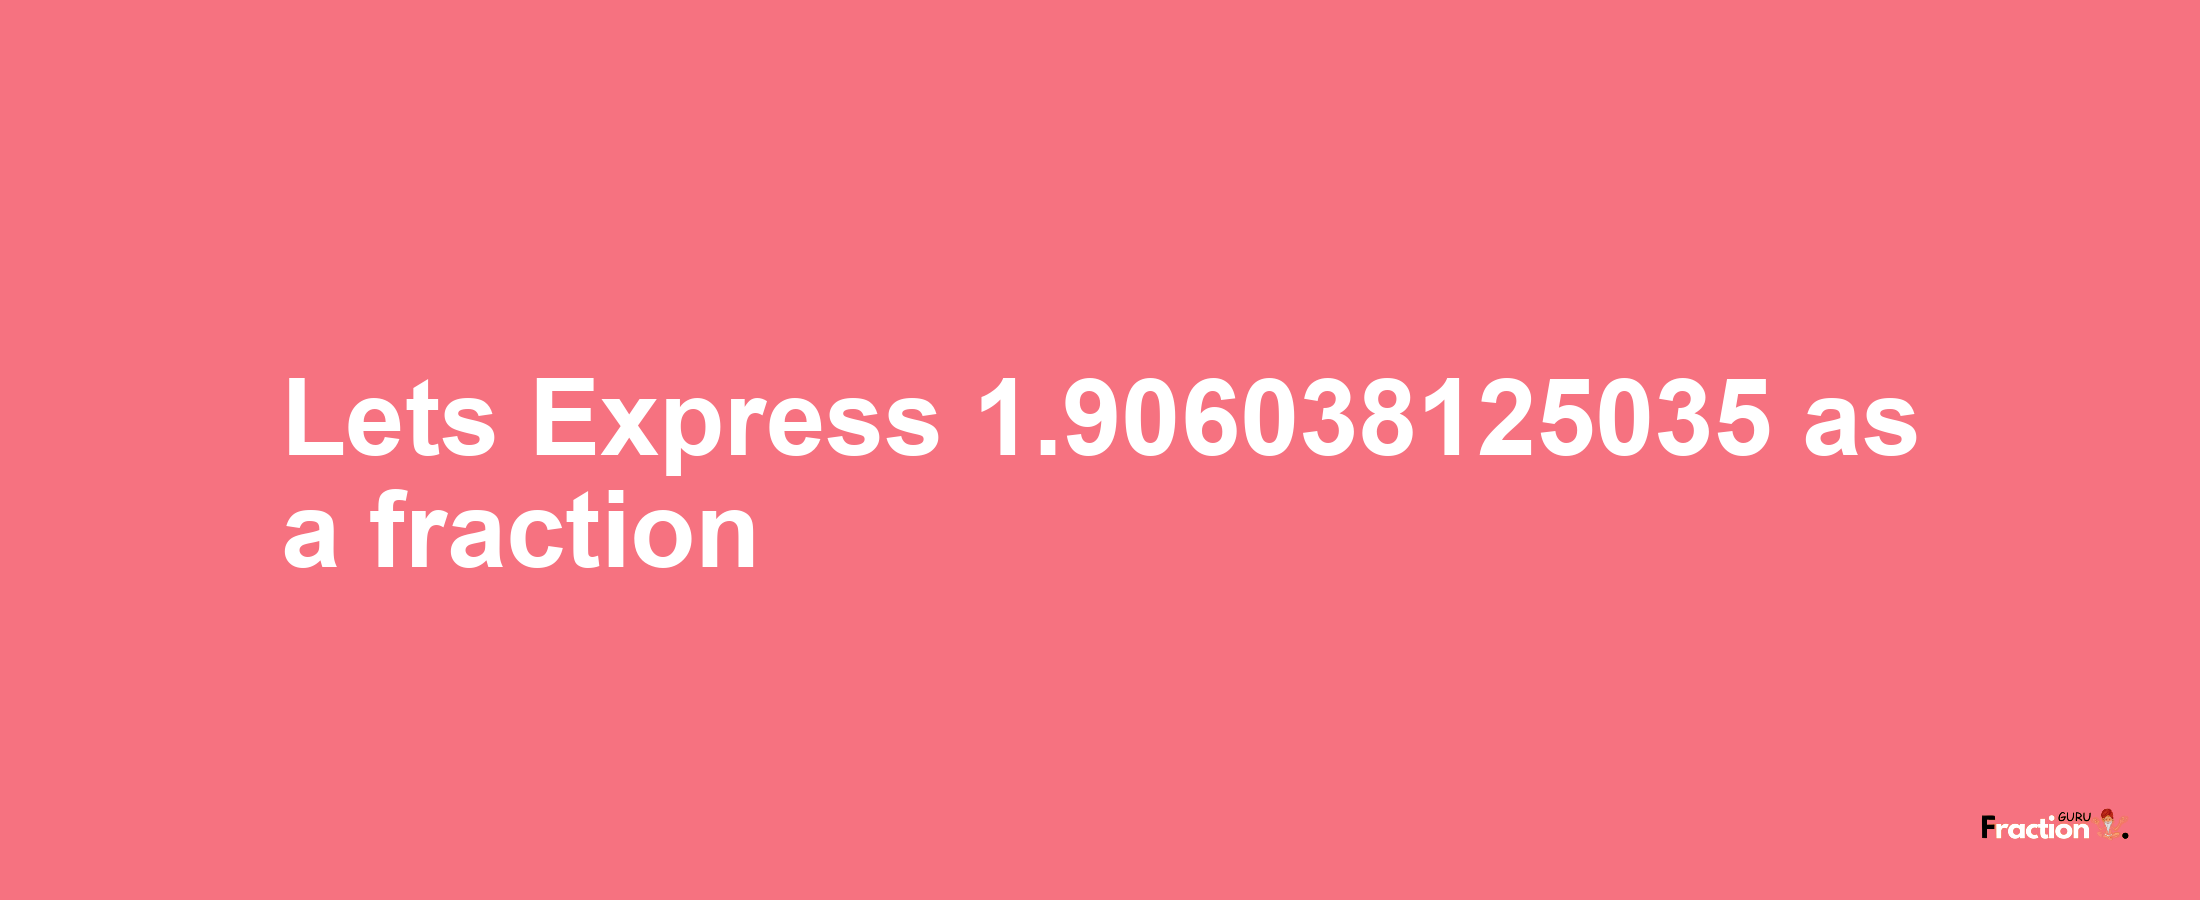 Lets Express 1.906038125035 as afraction